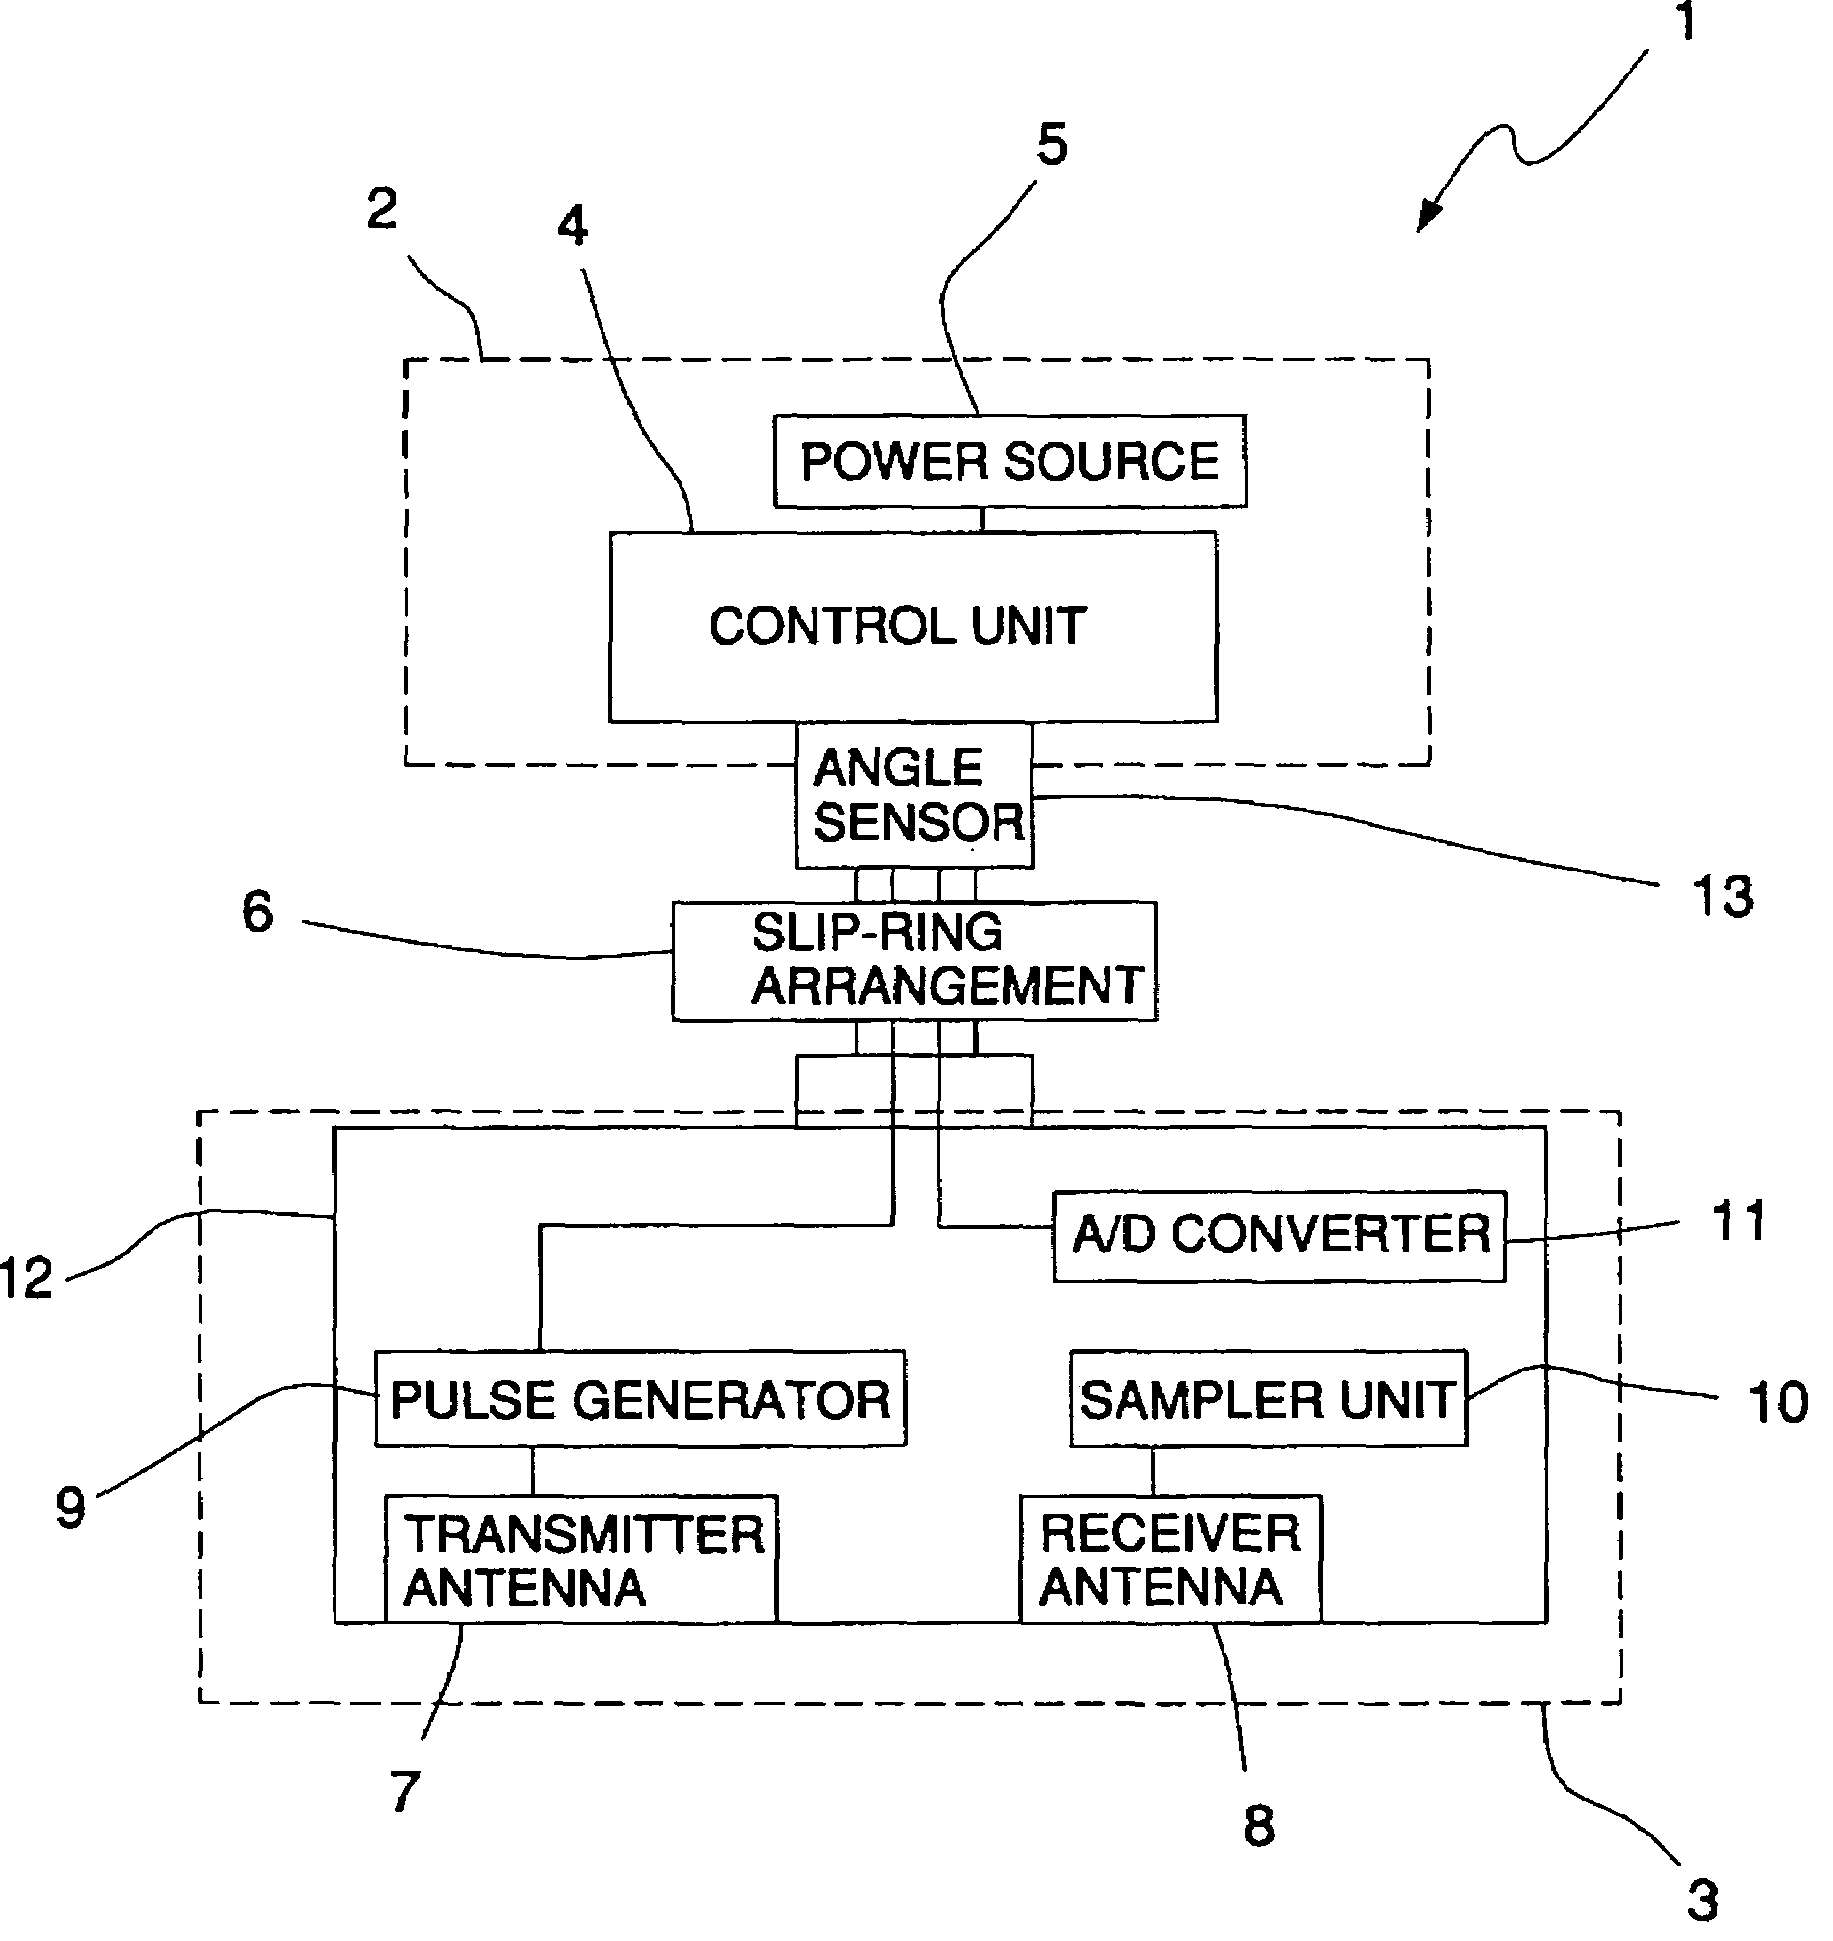 Apparatus for collecting ground radar data with polarization information